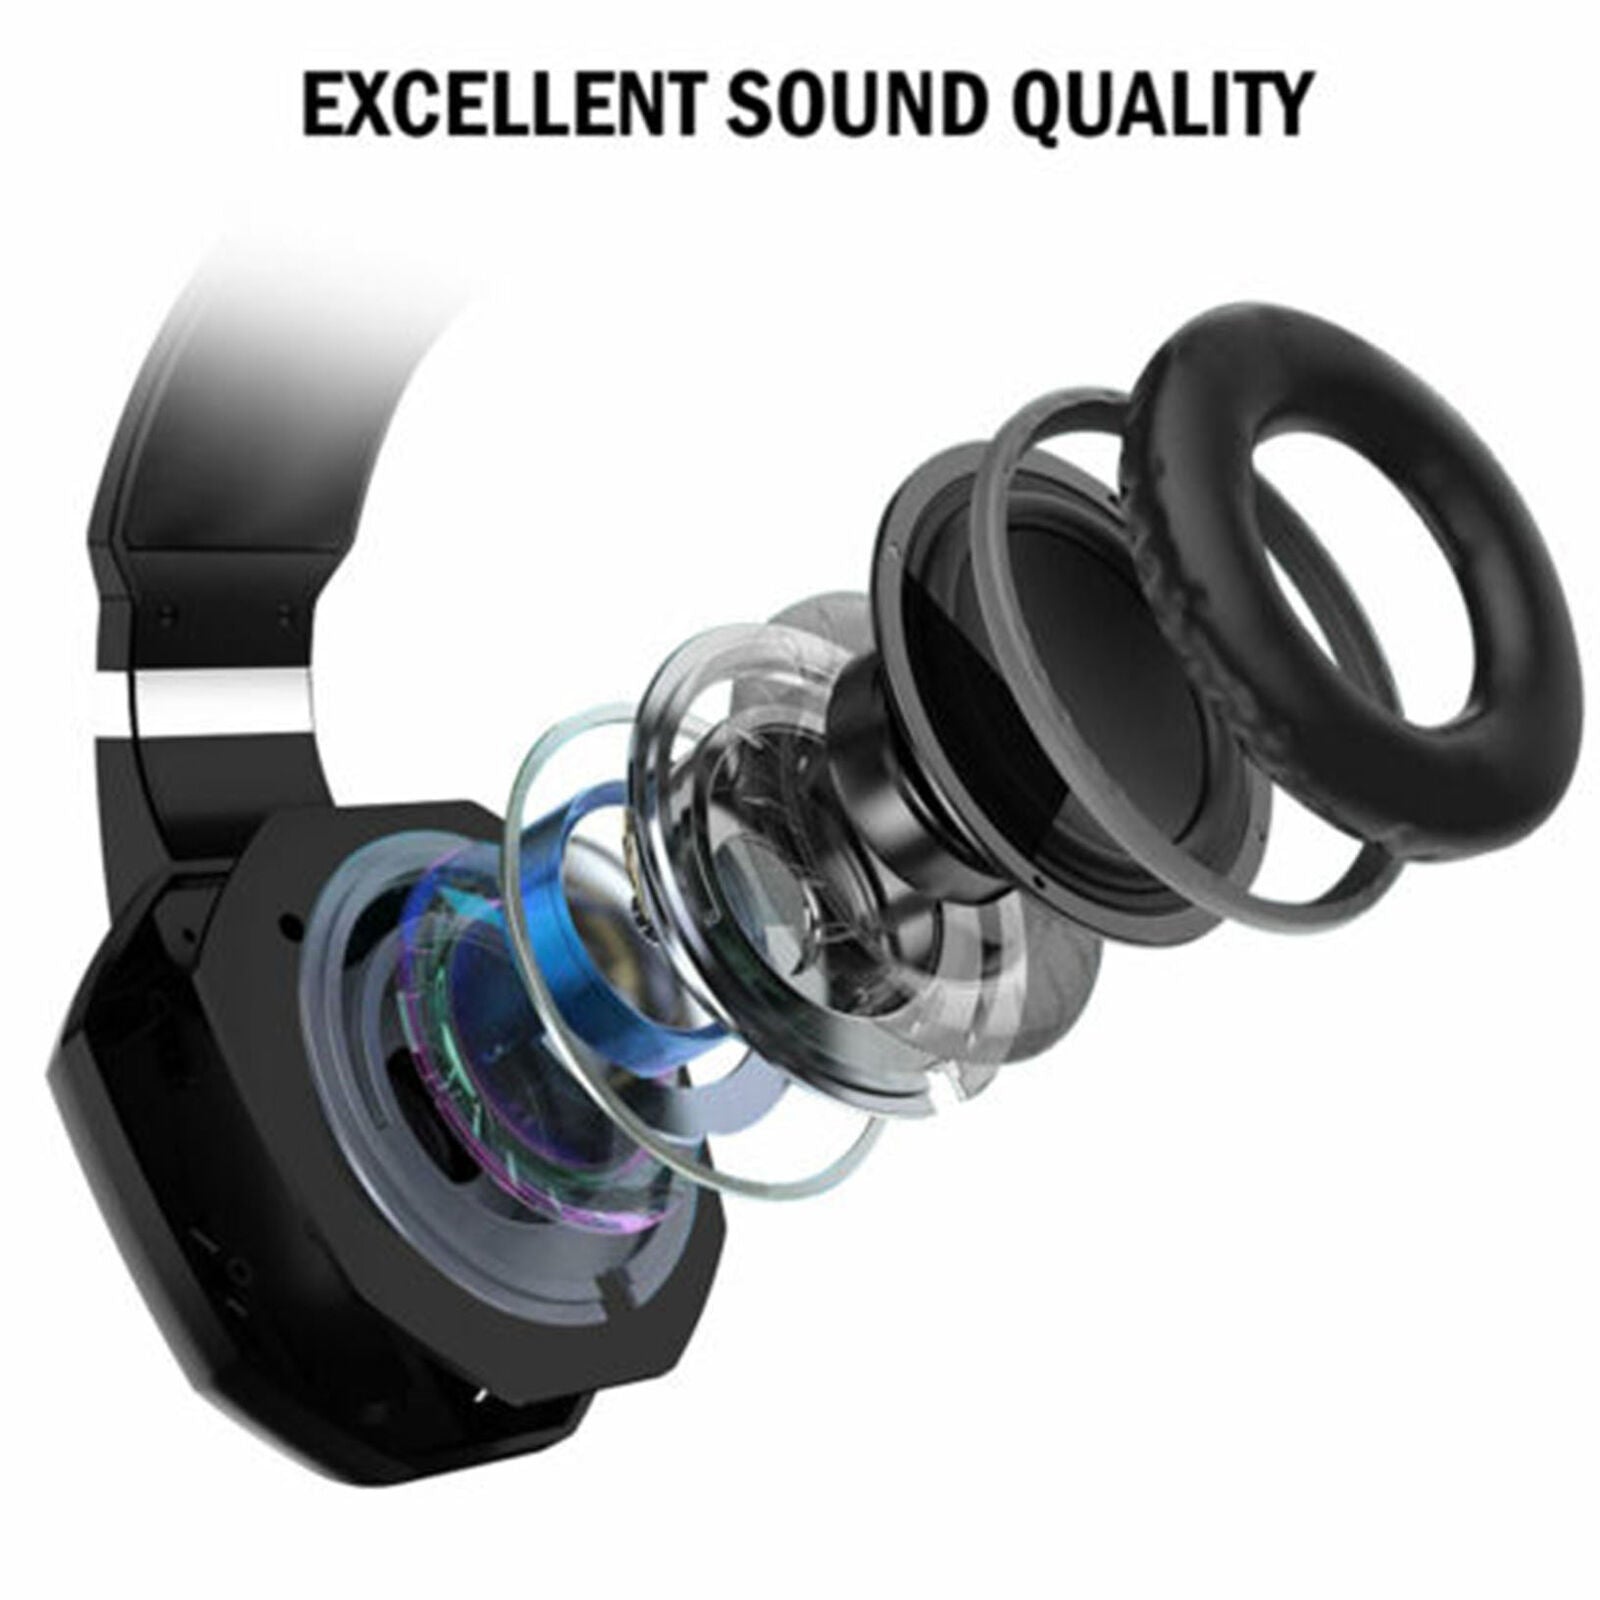 LED Gaming Headset Headphone Noise Reduction Mic Surround Sound for PS4/Xbox one